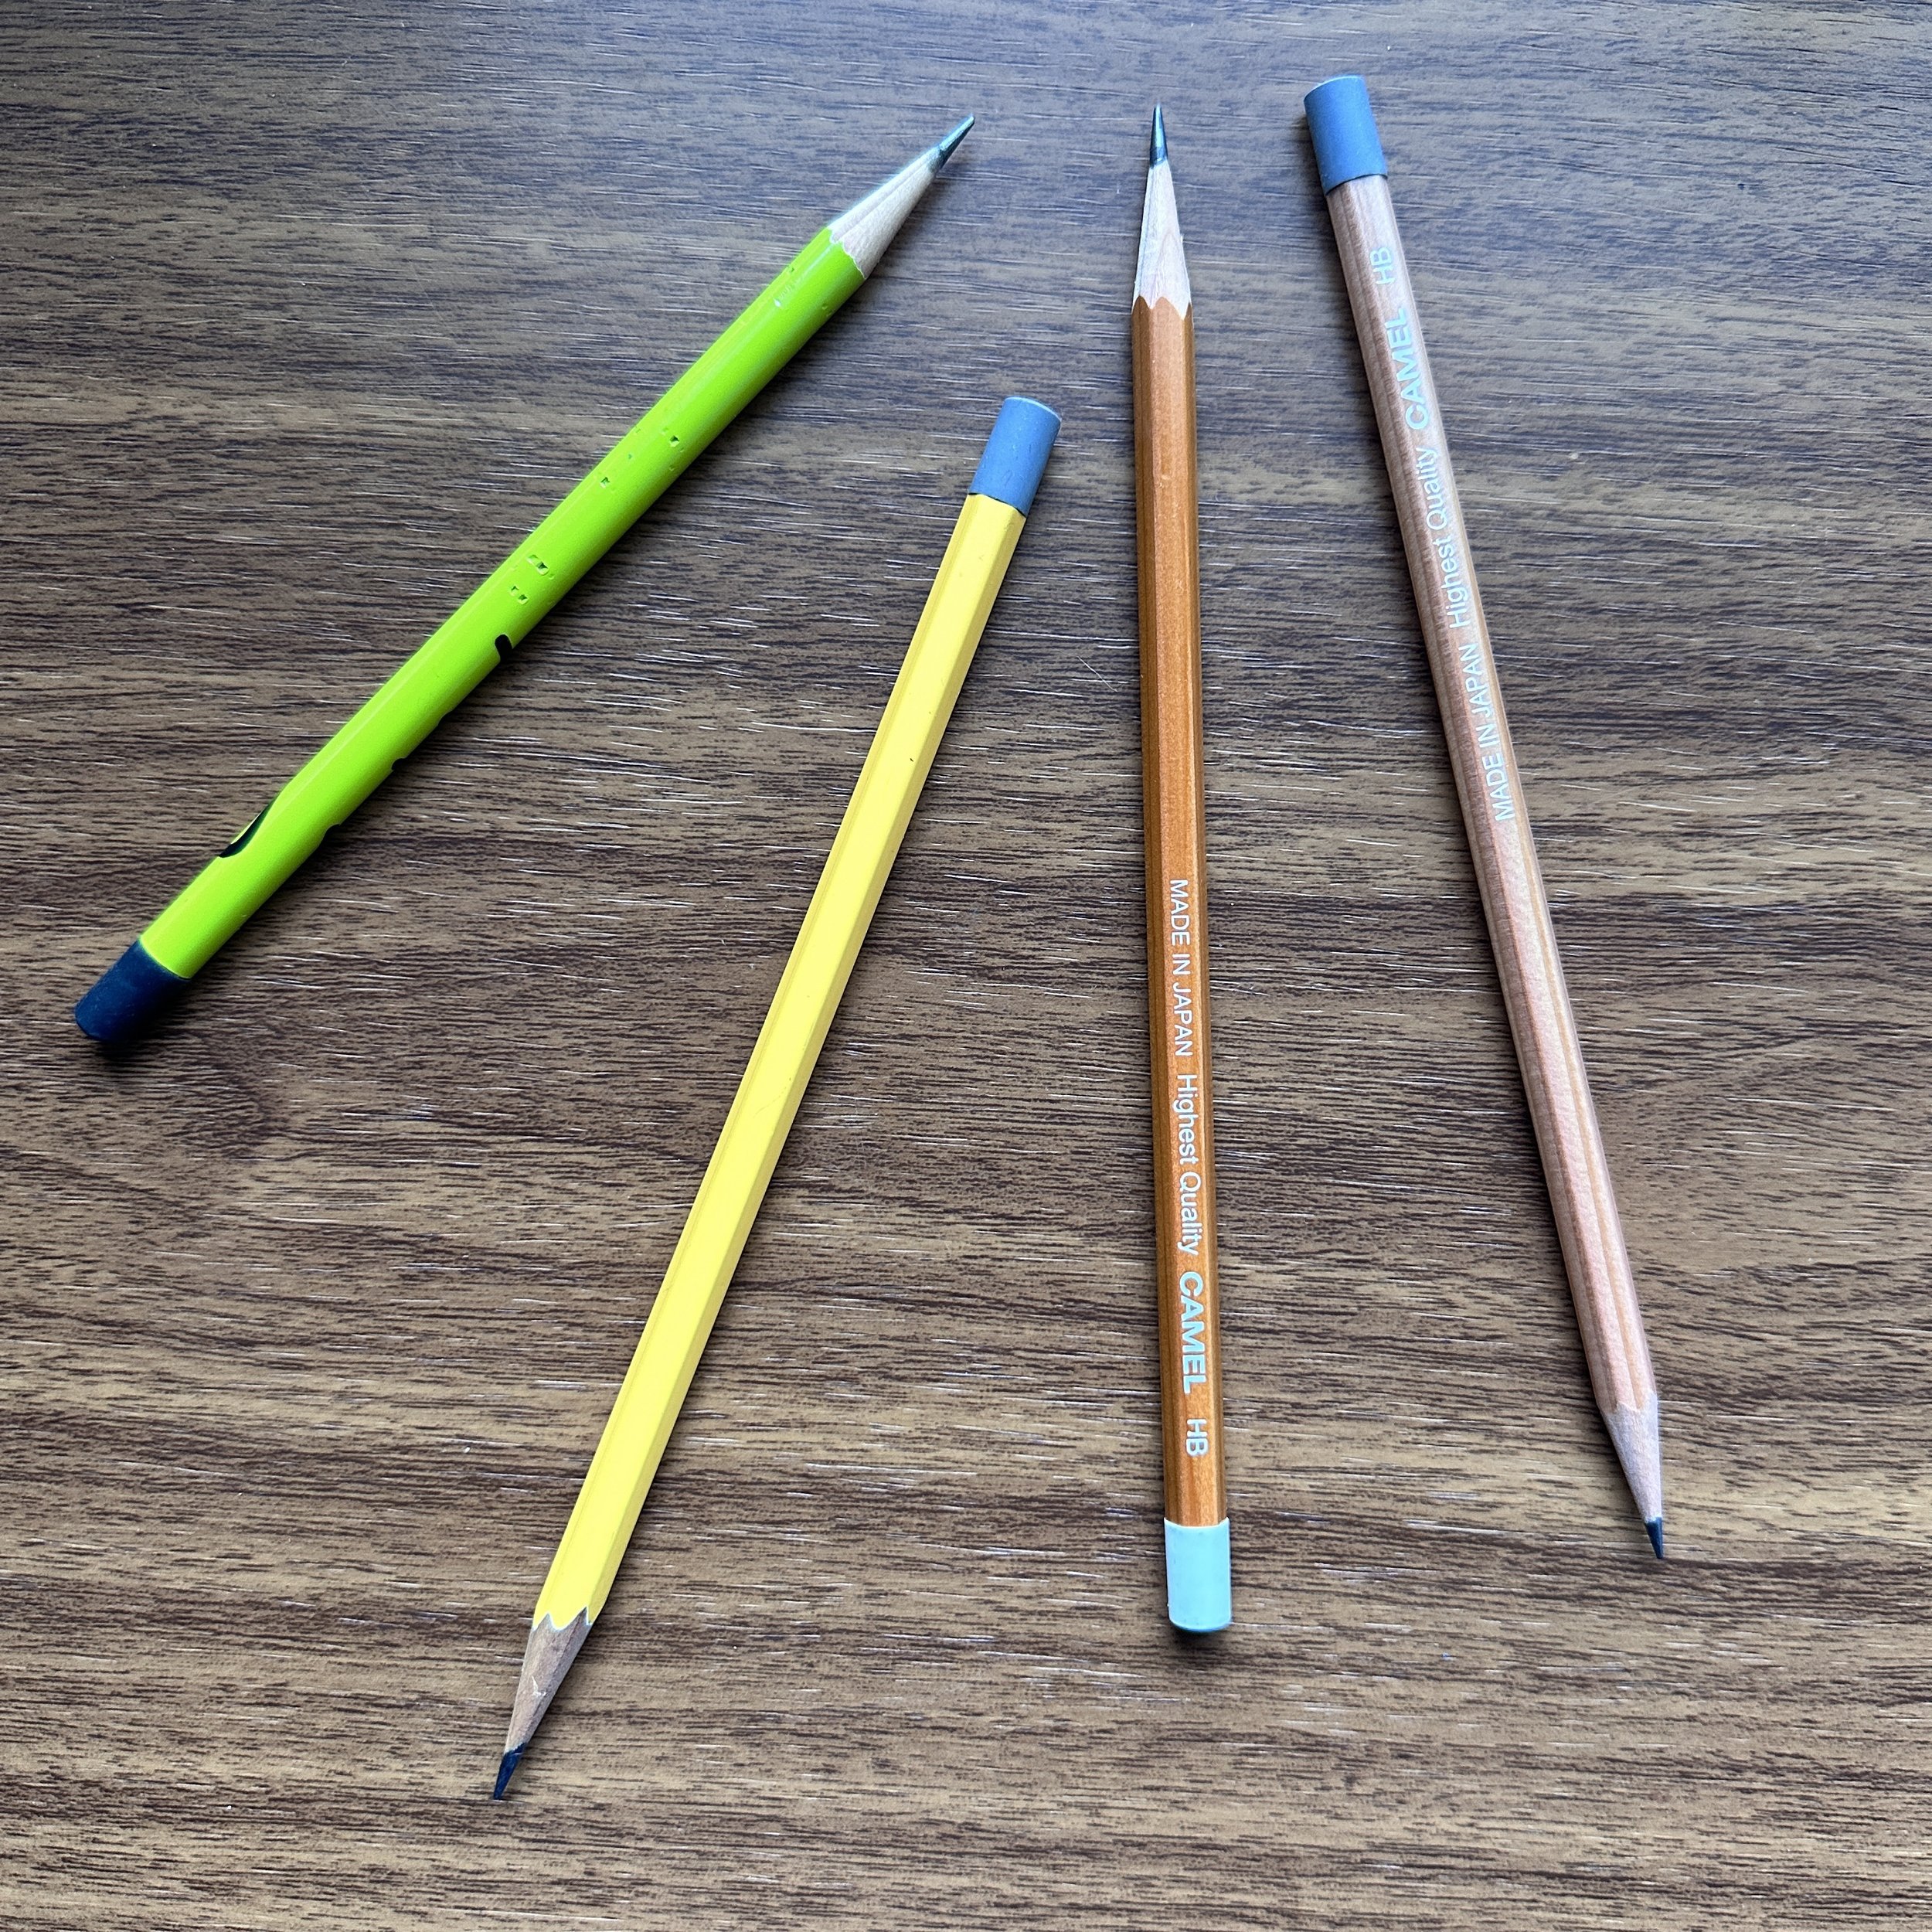 Pencil Review: Camel Pencils and the Joy of the Integrated Eraser